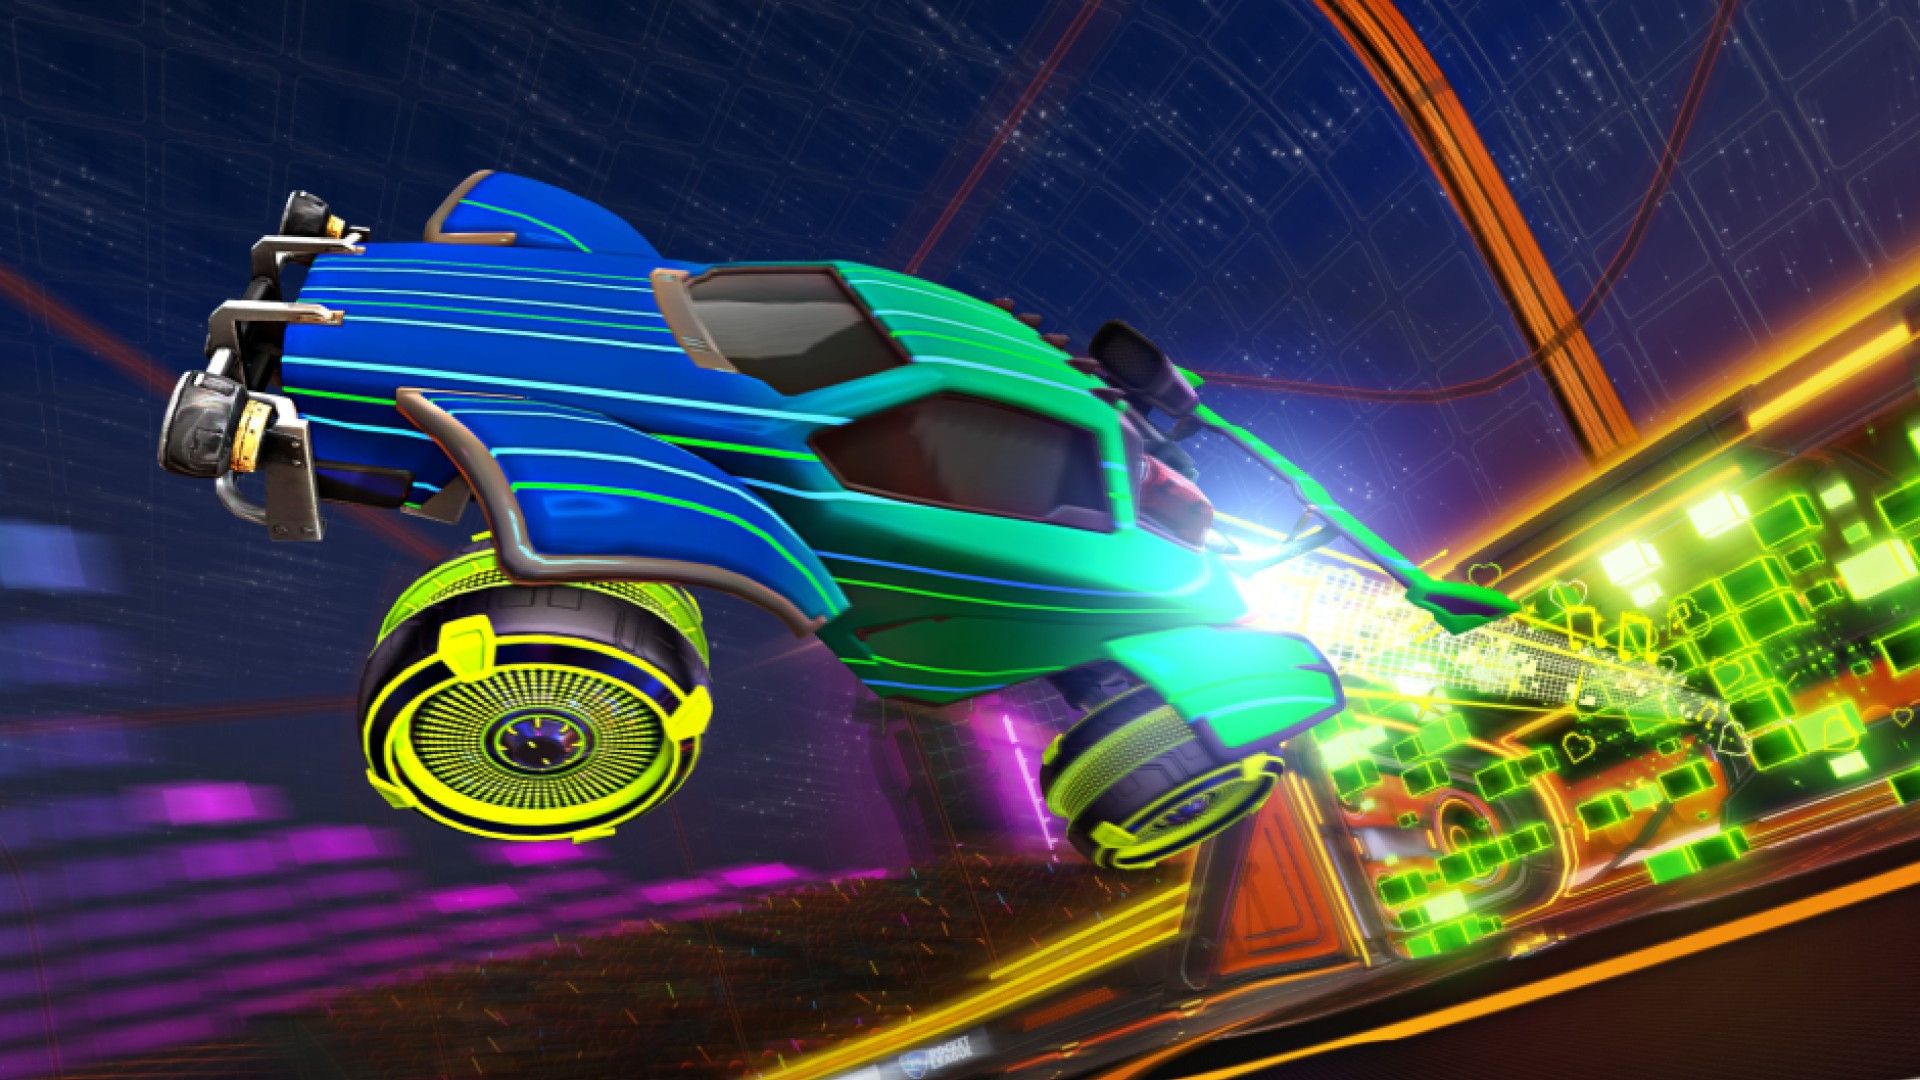 Season 2 Drops December 9 in Rocket League with Xbox Series X. S Optimizations